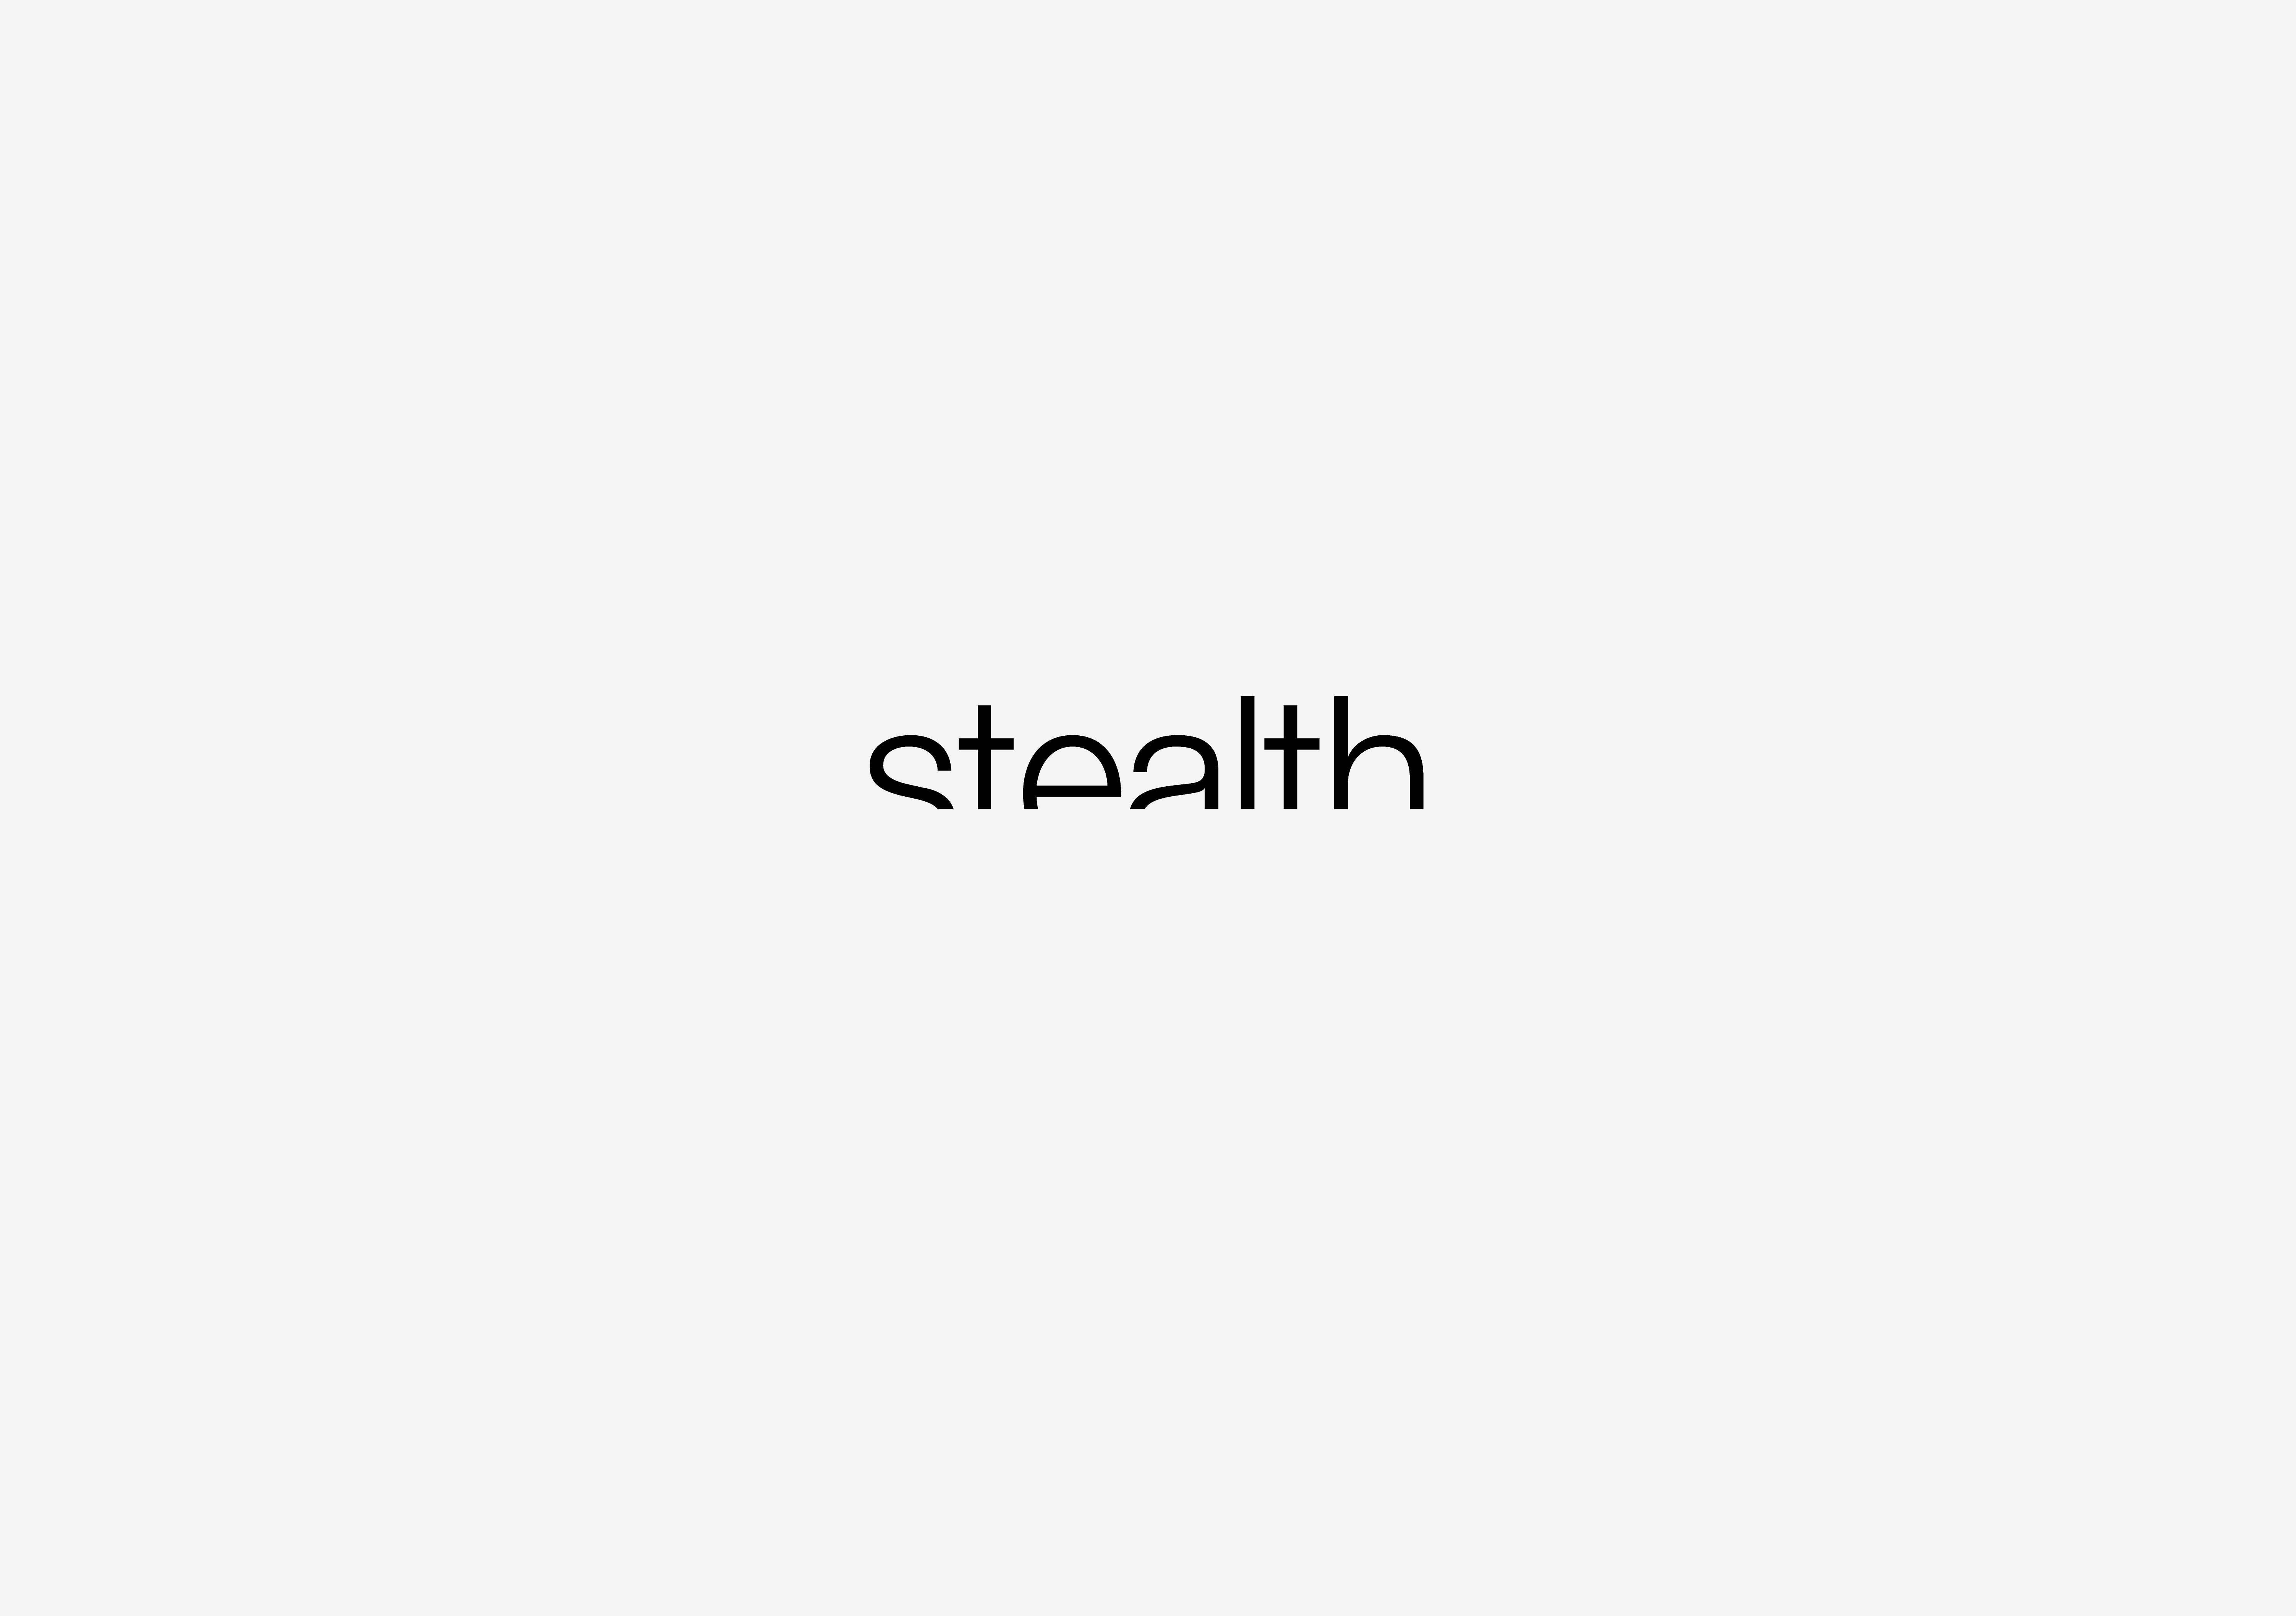 Branding for Stealth Security, by Ottawa Graphic Design Studio idApostle